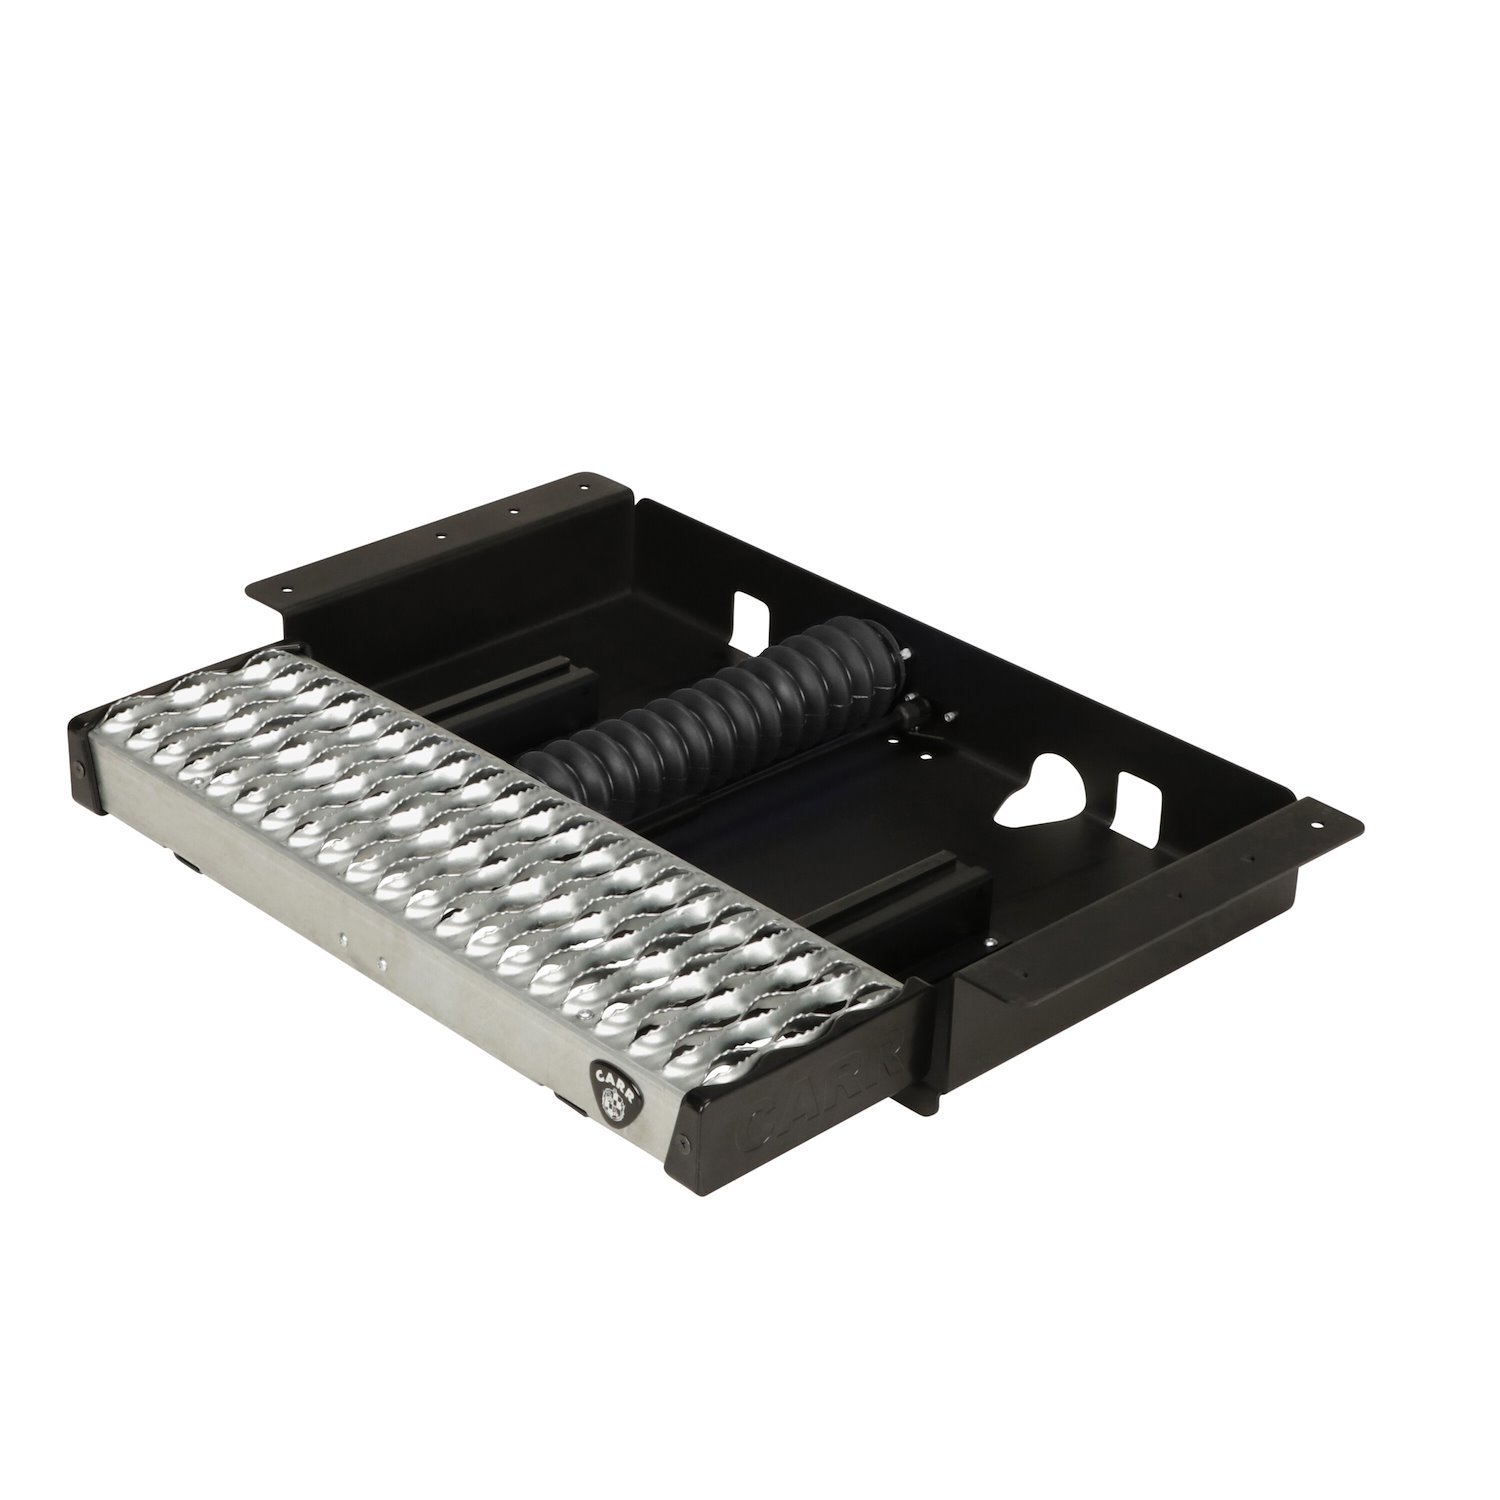 501020 WTS 24 in. Retractable Step, Undermount - Extended Flat Surface [XP3 Black/Galvanized]